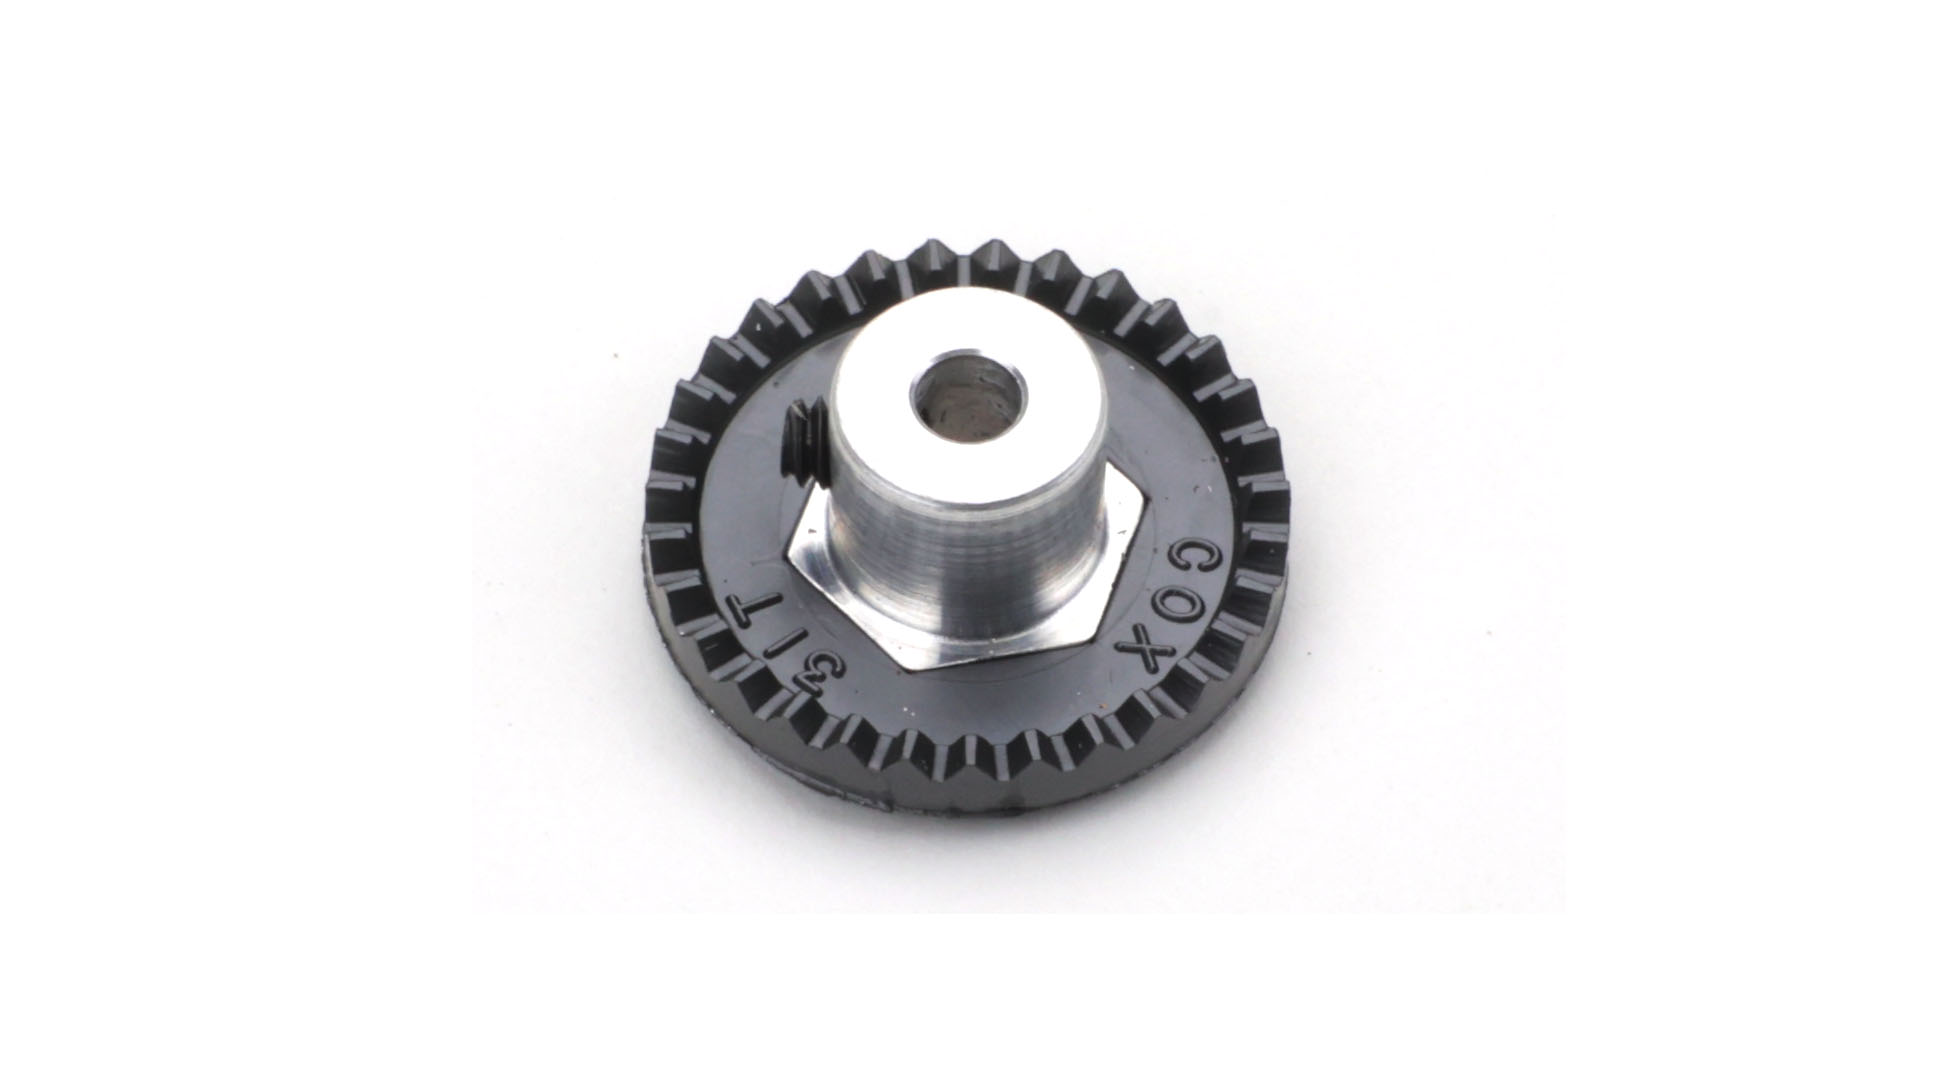 3 slot car gears  31 tooth 48 pitch crown gears for 1/8 axle 